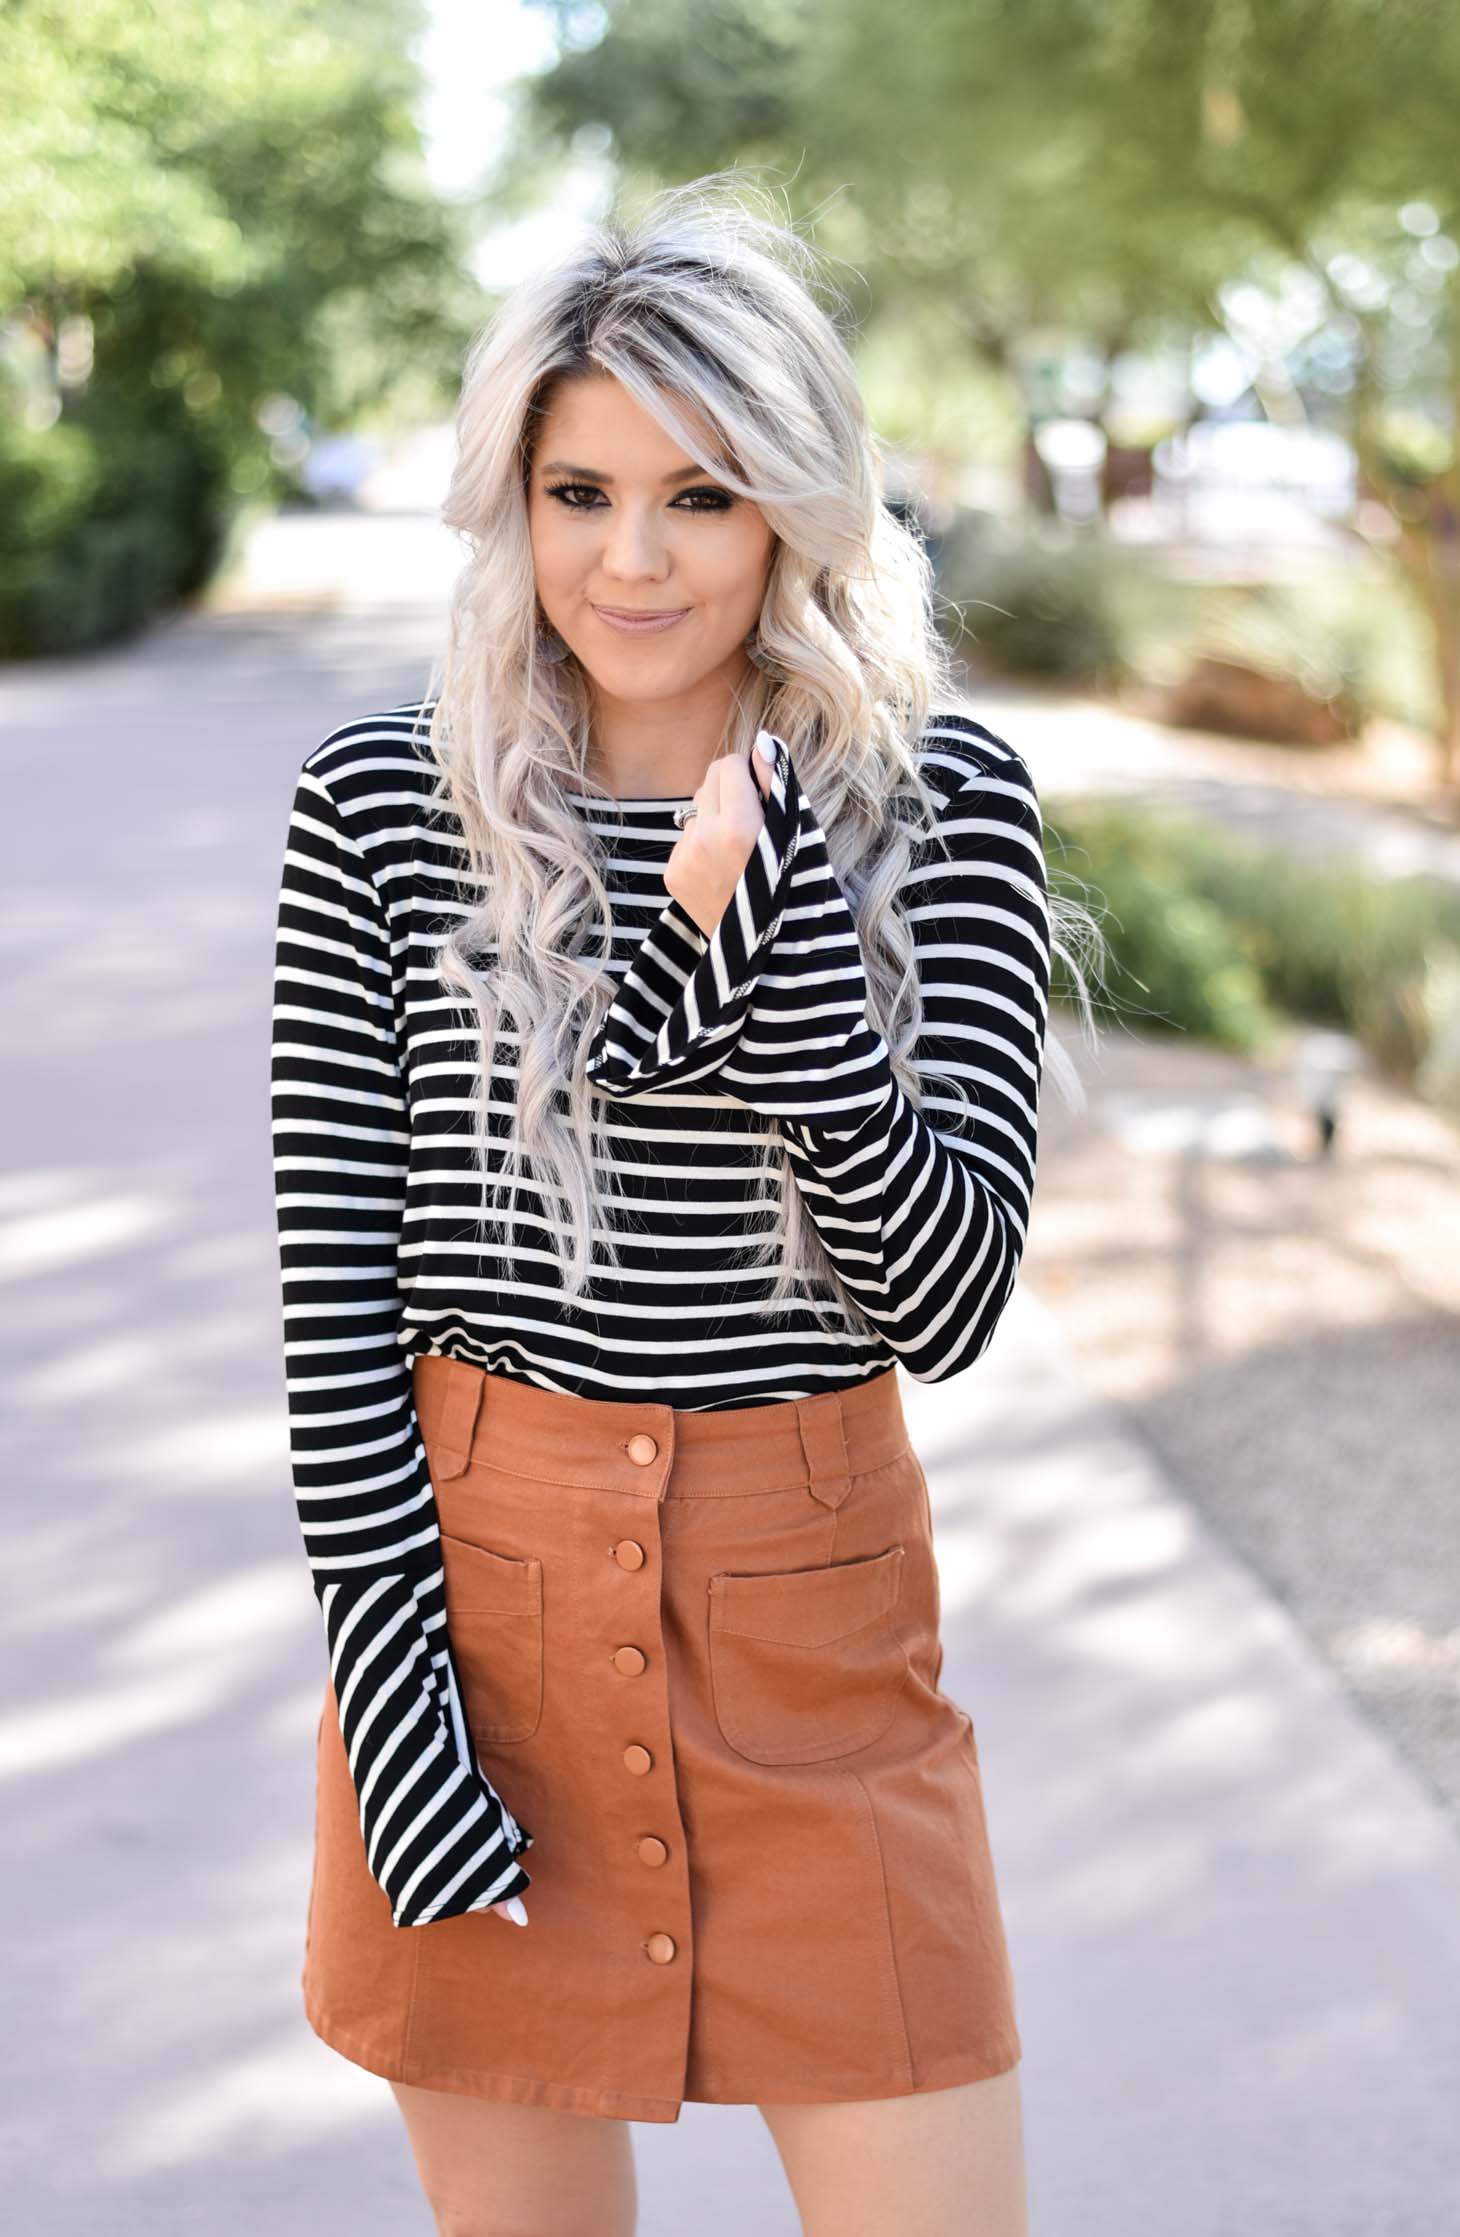 Erin Elizabeth of Wink and a Twirl shares two ways to style a striped top from Pink Lily Boutique perfect for your fall style this year